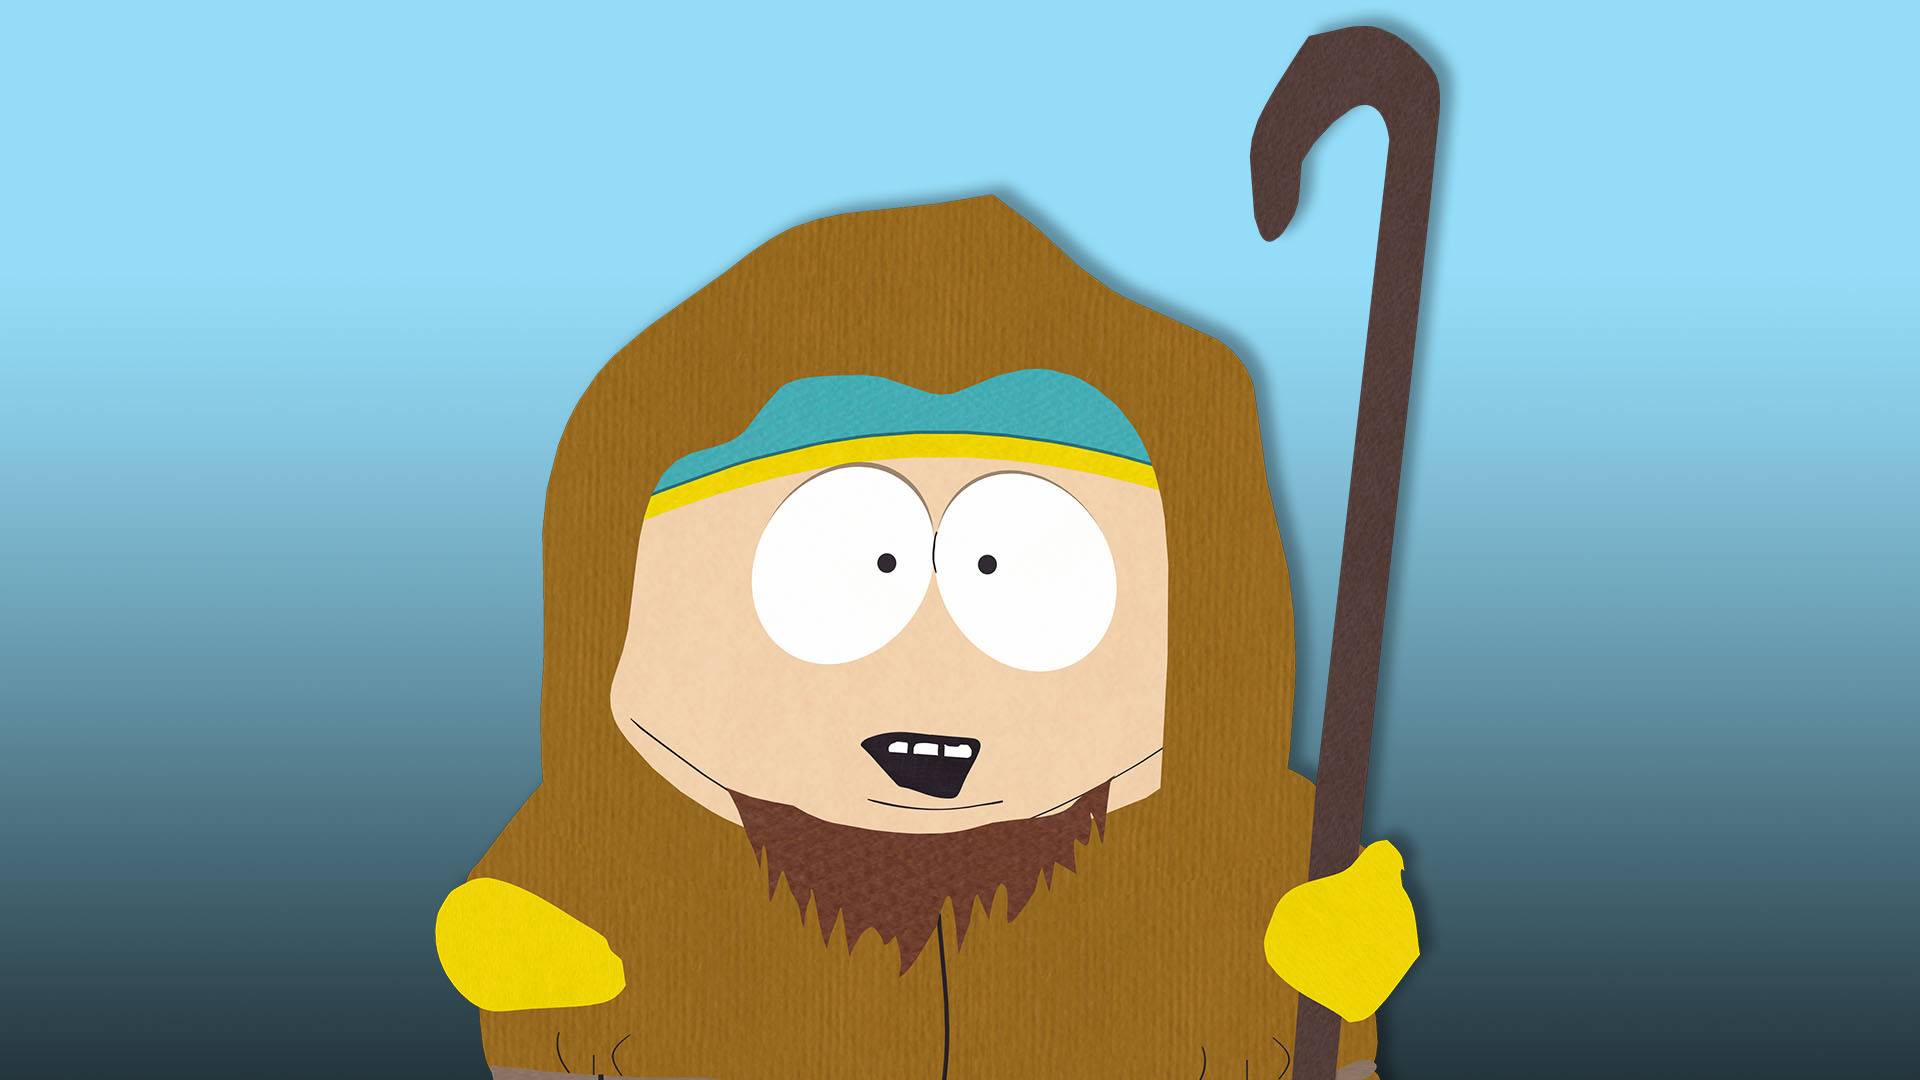 SOUTH PARK COLLECTIONS — BRIANANDREWBYRD